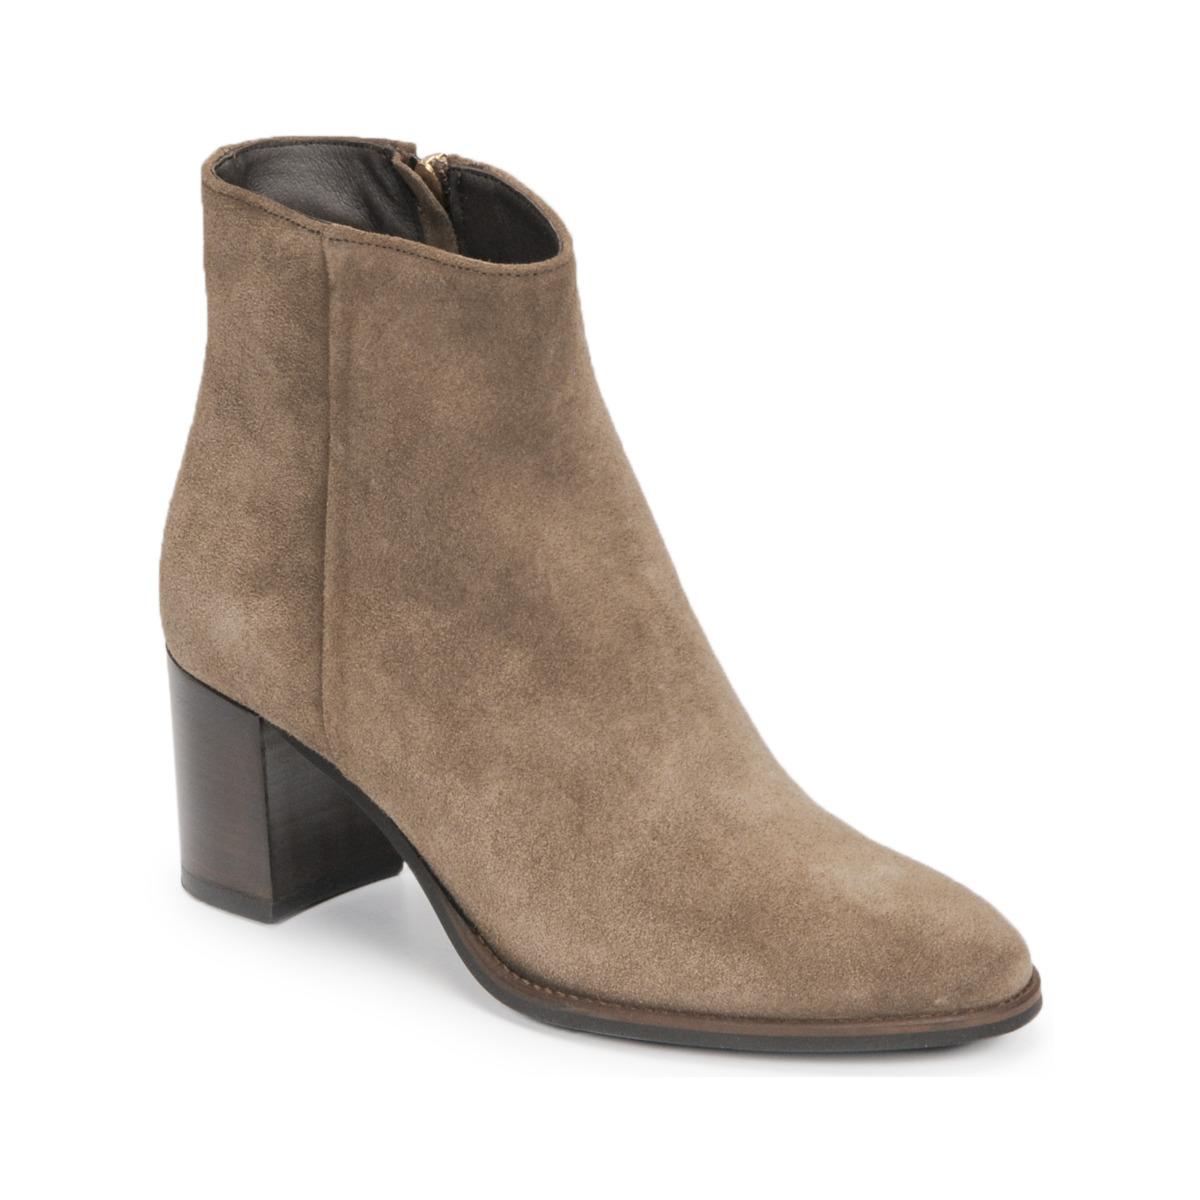 Chaussures Femme Bottines Minelli KELLYNA Taupe